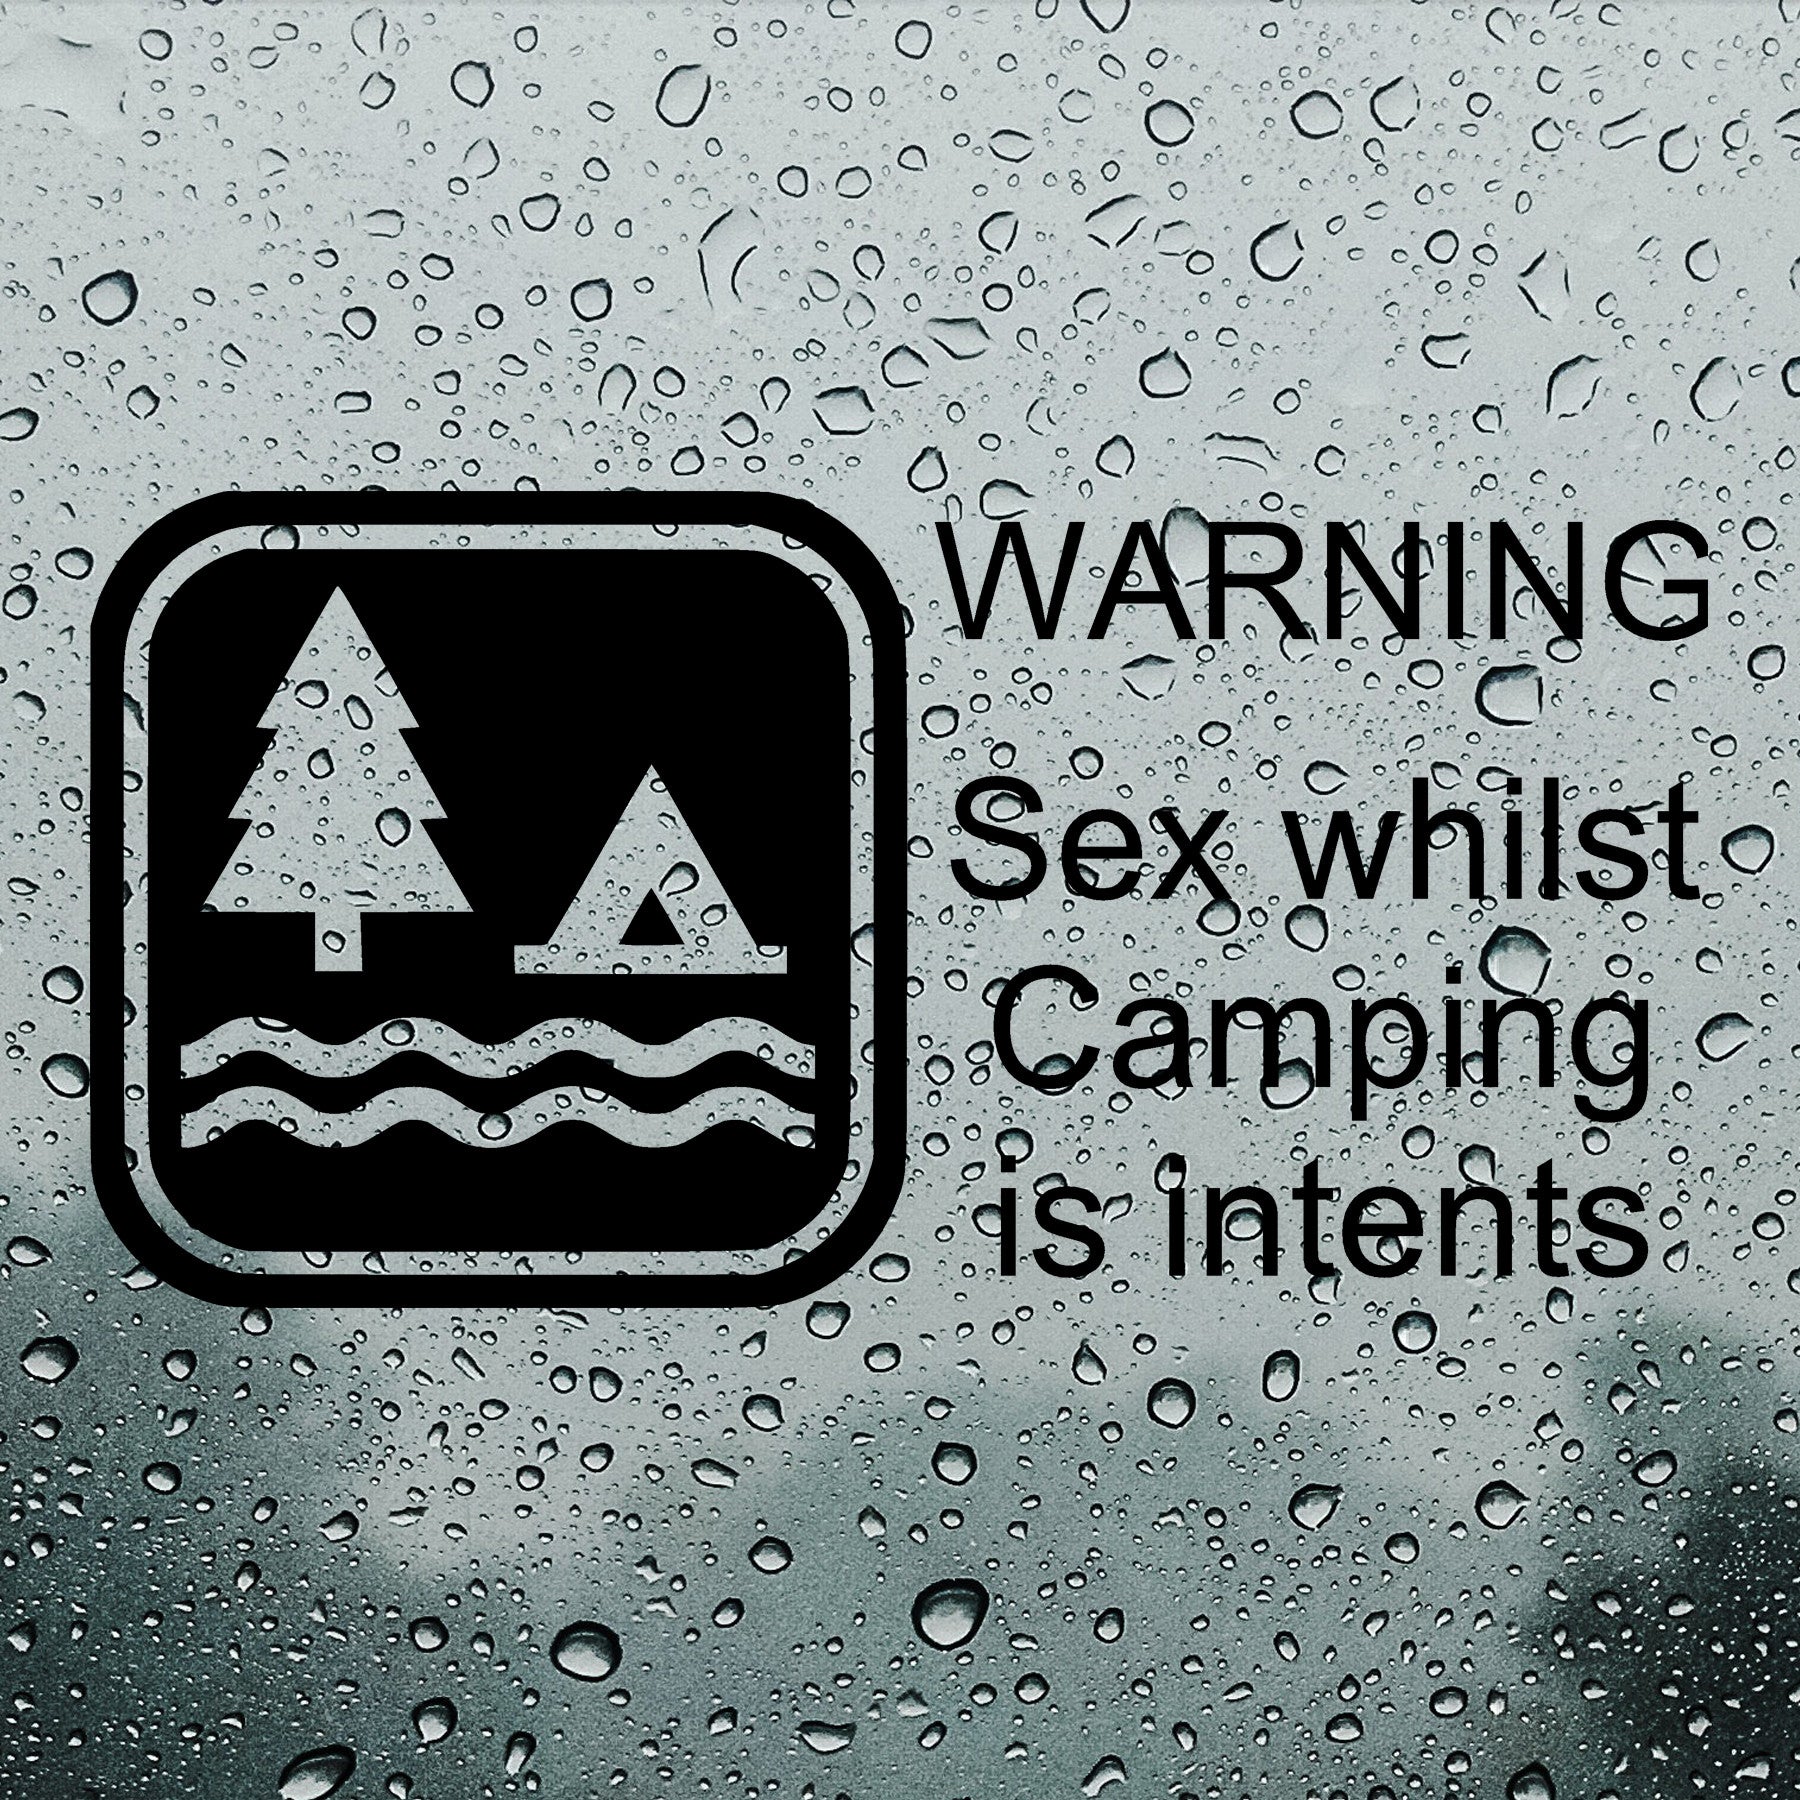 Sex whilst camping is intents | Bumper sticker - Adnil Creations